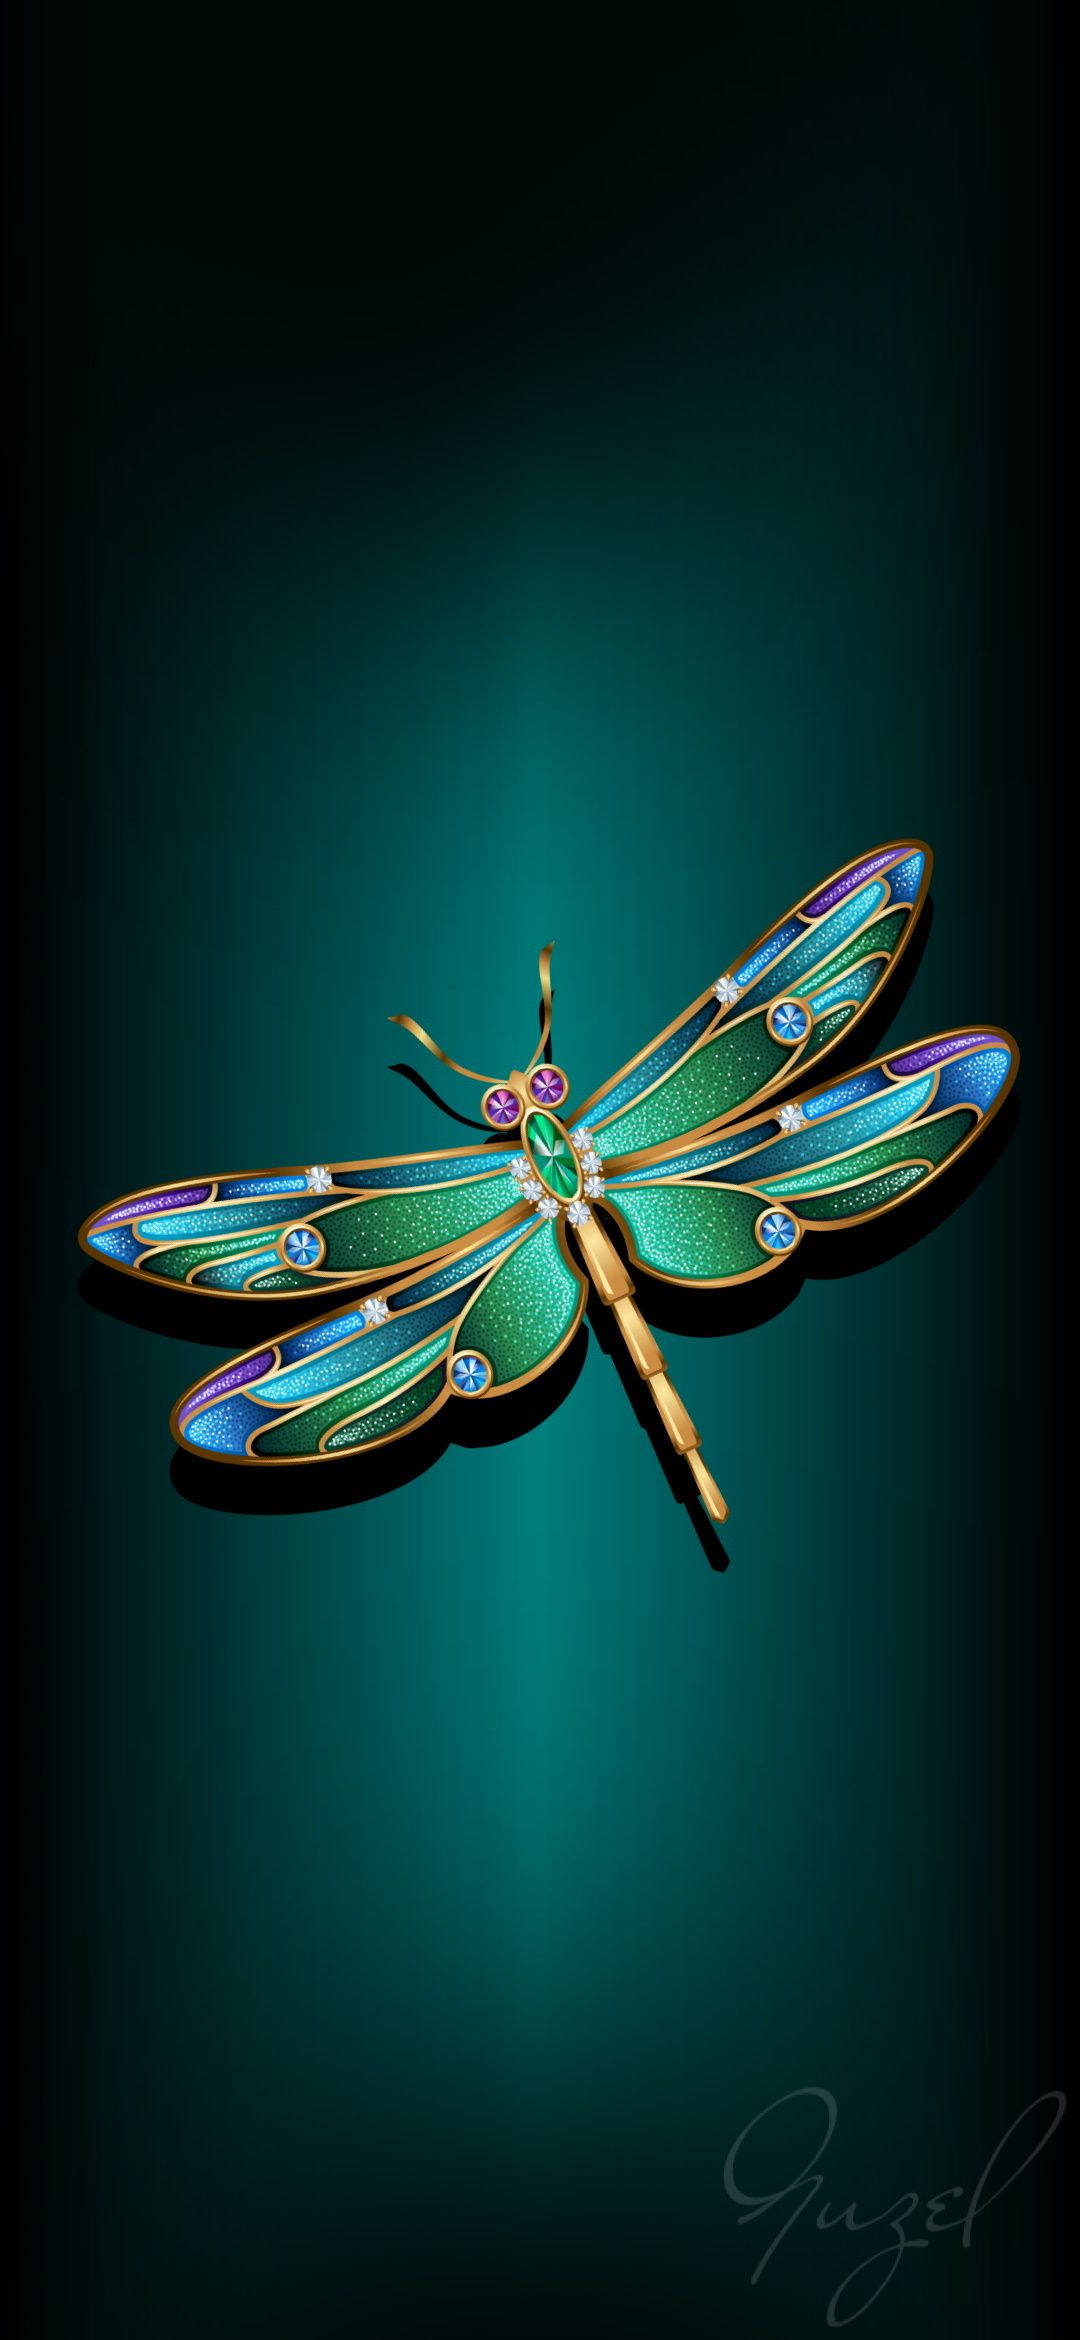 Made By Guzel Dragonfly Wallpaper iPhone Cute